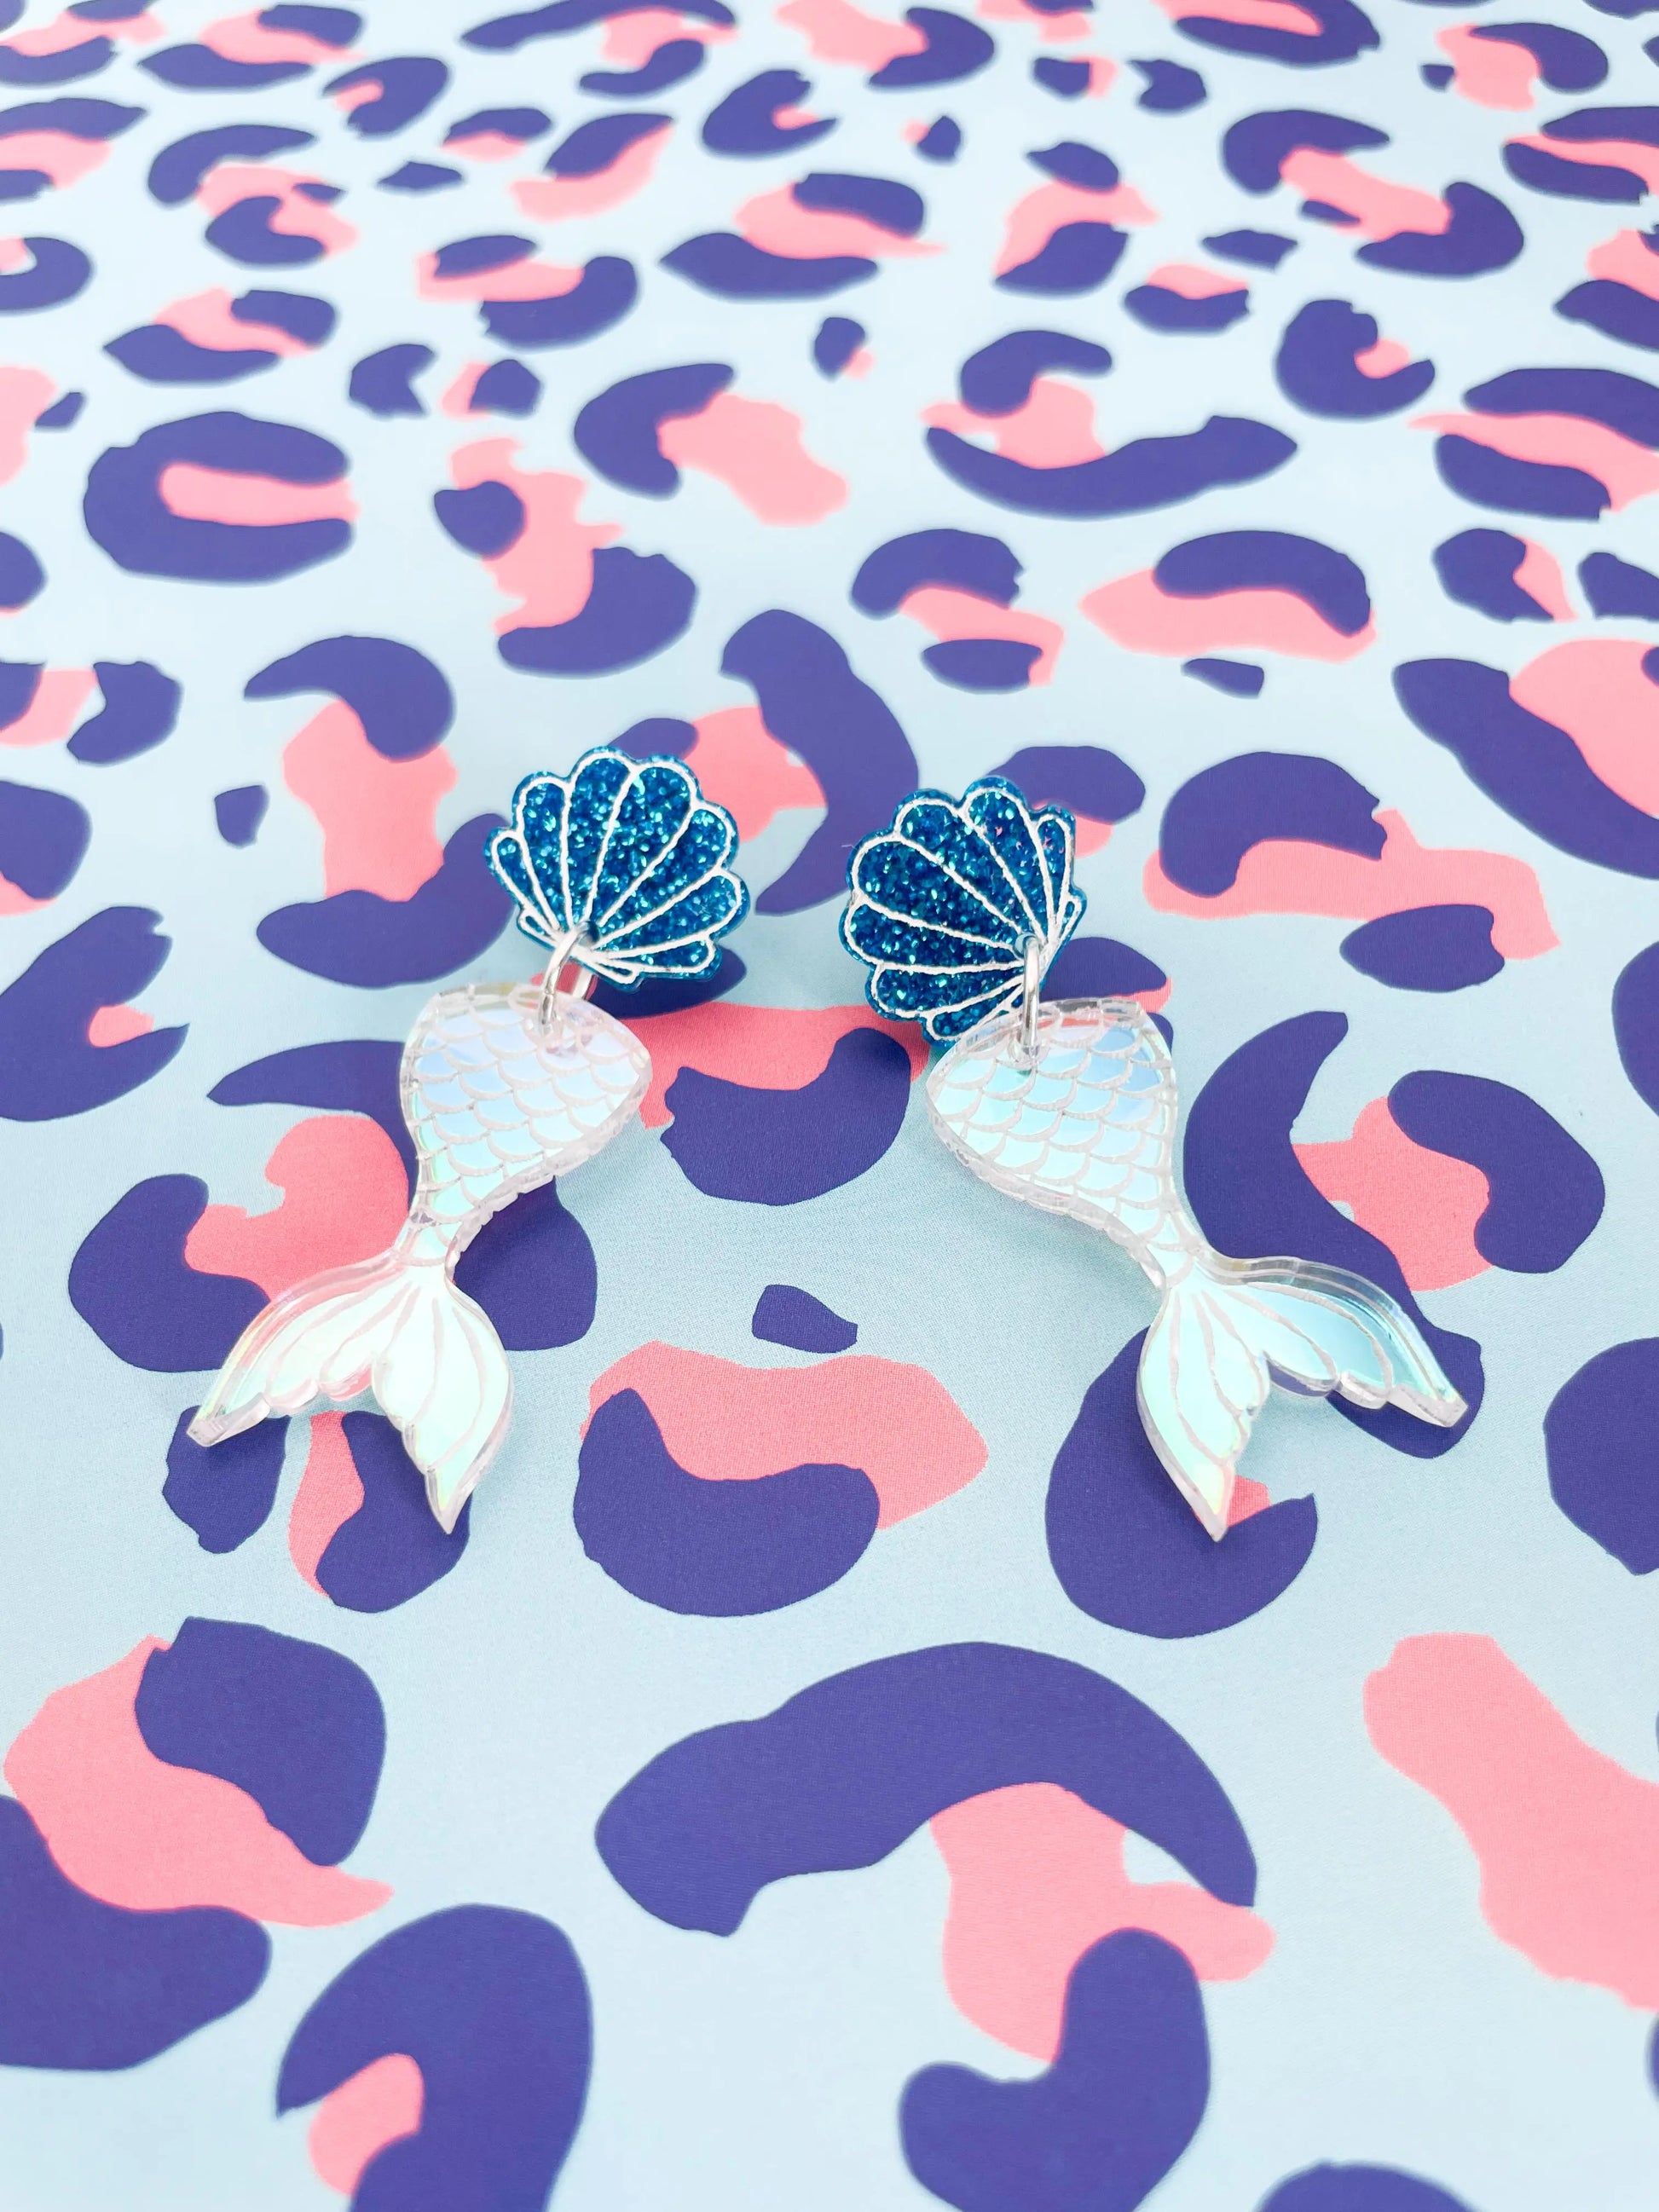 Iridescent and Blue Glitter Acrylic Shell & Mermaid Tail Dangle Earrings from Sapphire Frills